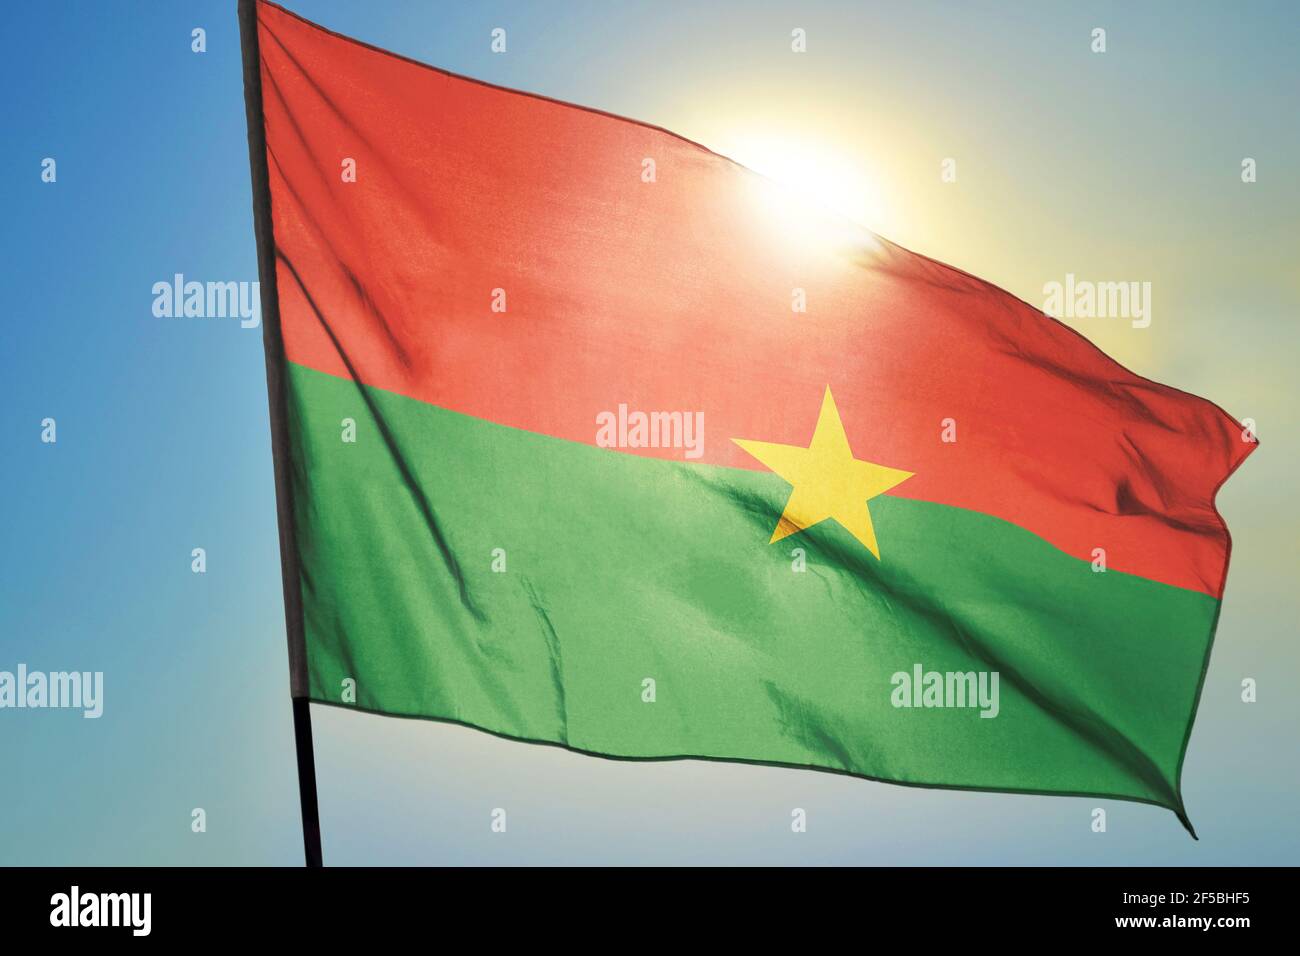 Burkina Faso flag waving on the wind in front of sun Stock Photo